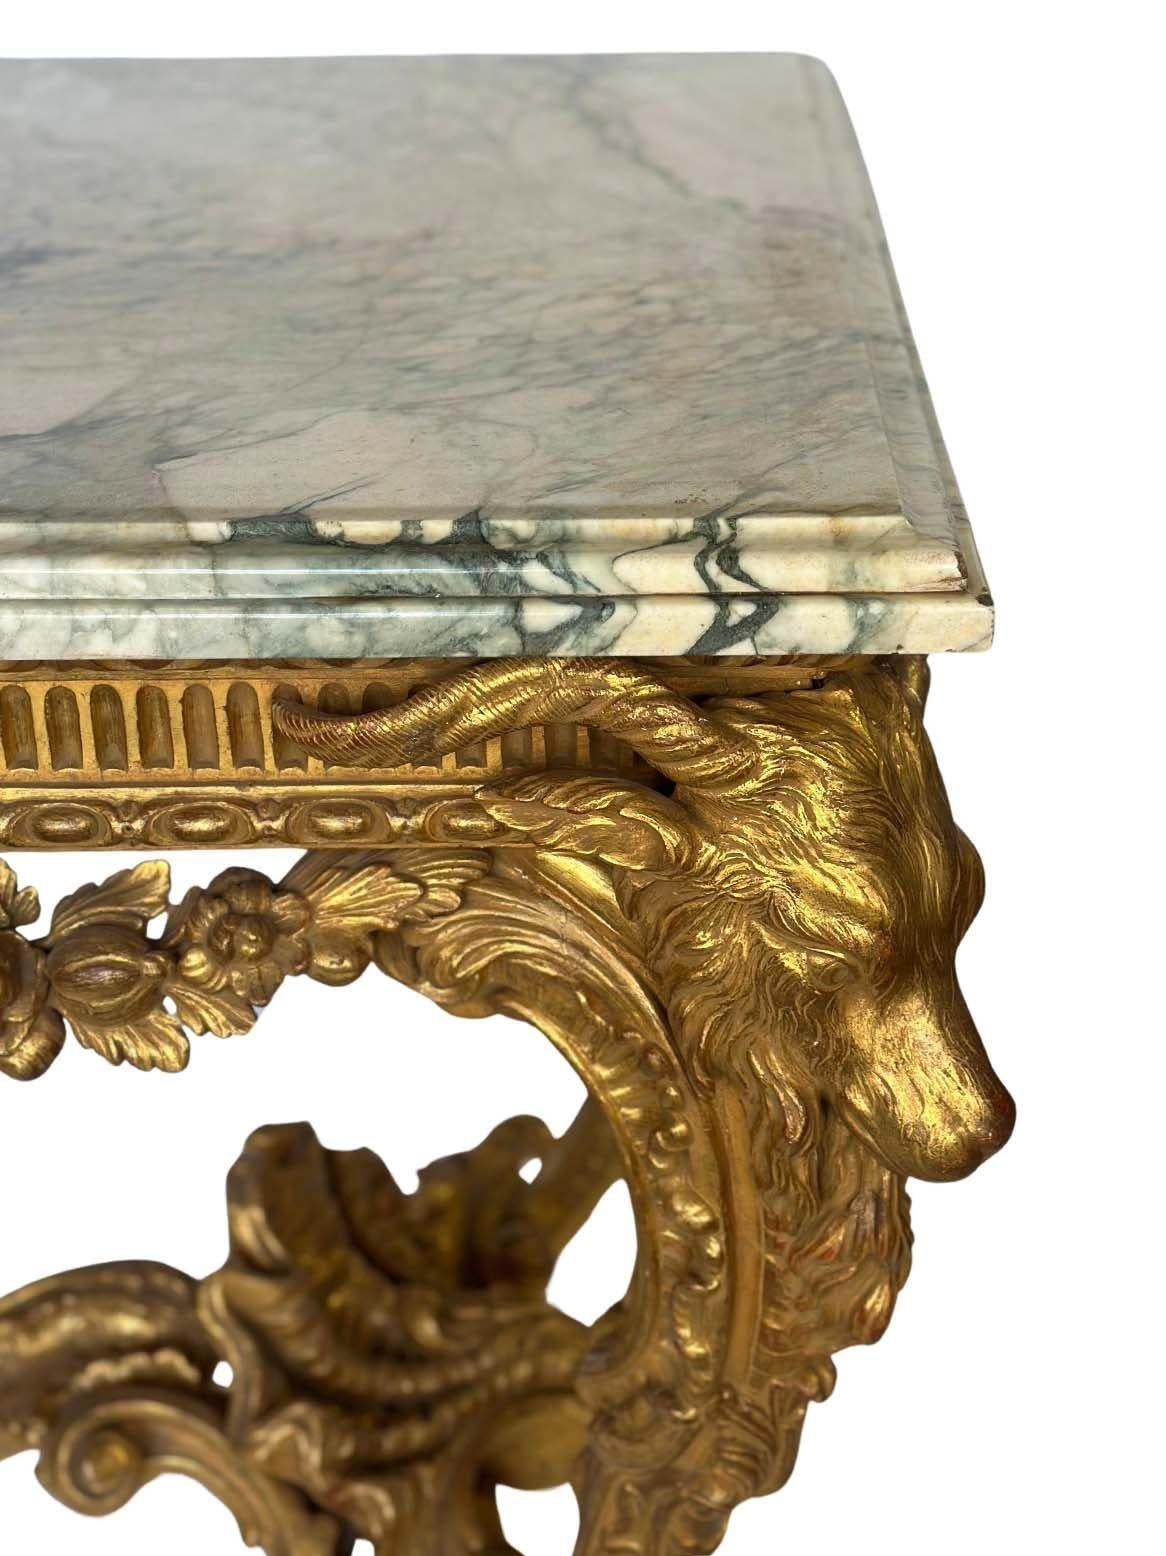 Exceptional Neoclassical giltwood console table, made in England in the Late 19th Century, consisting of a hand-carved giltwood table frame having ram heads and feet, as well as a center figure of a putti with a fish-looking tale. The console is